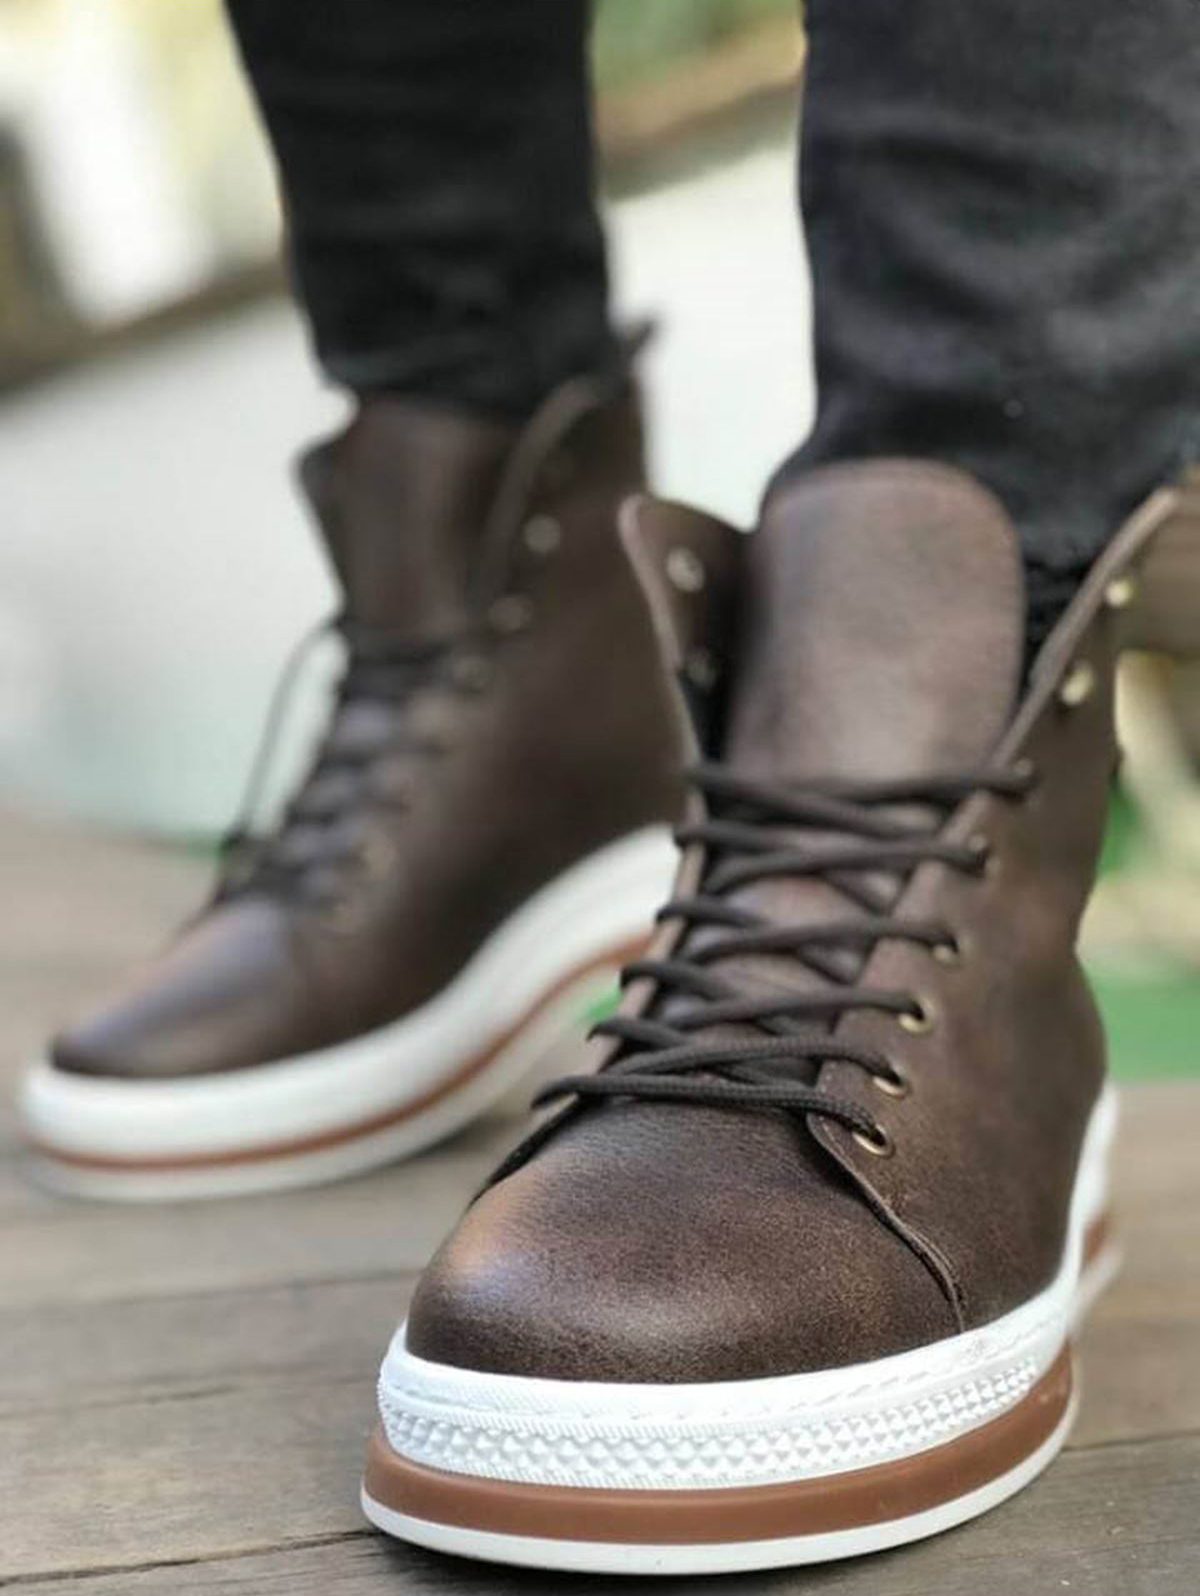 Chekich Brand Tan Color Artificial Leather Men Boots Winter Snow Lace Up Boots Leather Brown Sneakers Super Warm Outdoor Male Lightweight Breathable Odorless Short Safety Footwear Hiking Sport Comfortable Sewing CH055